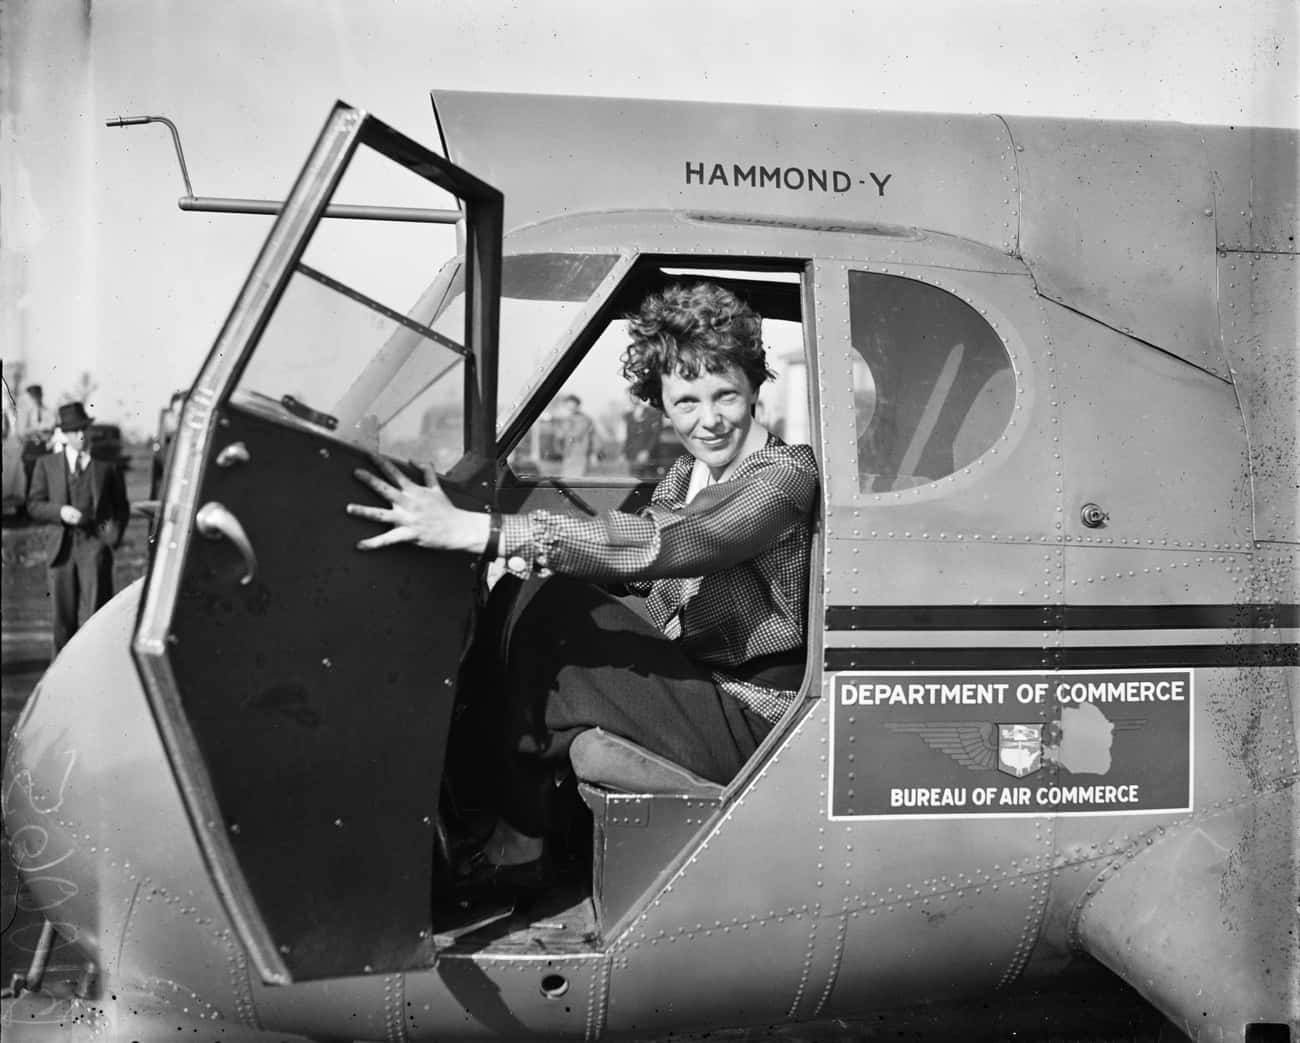 No Trace Of Amelia Earhart’s Plane Has Been Found, Despite Extensive Searches